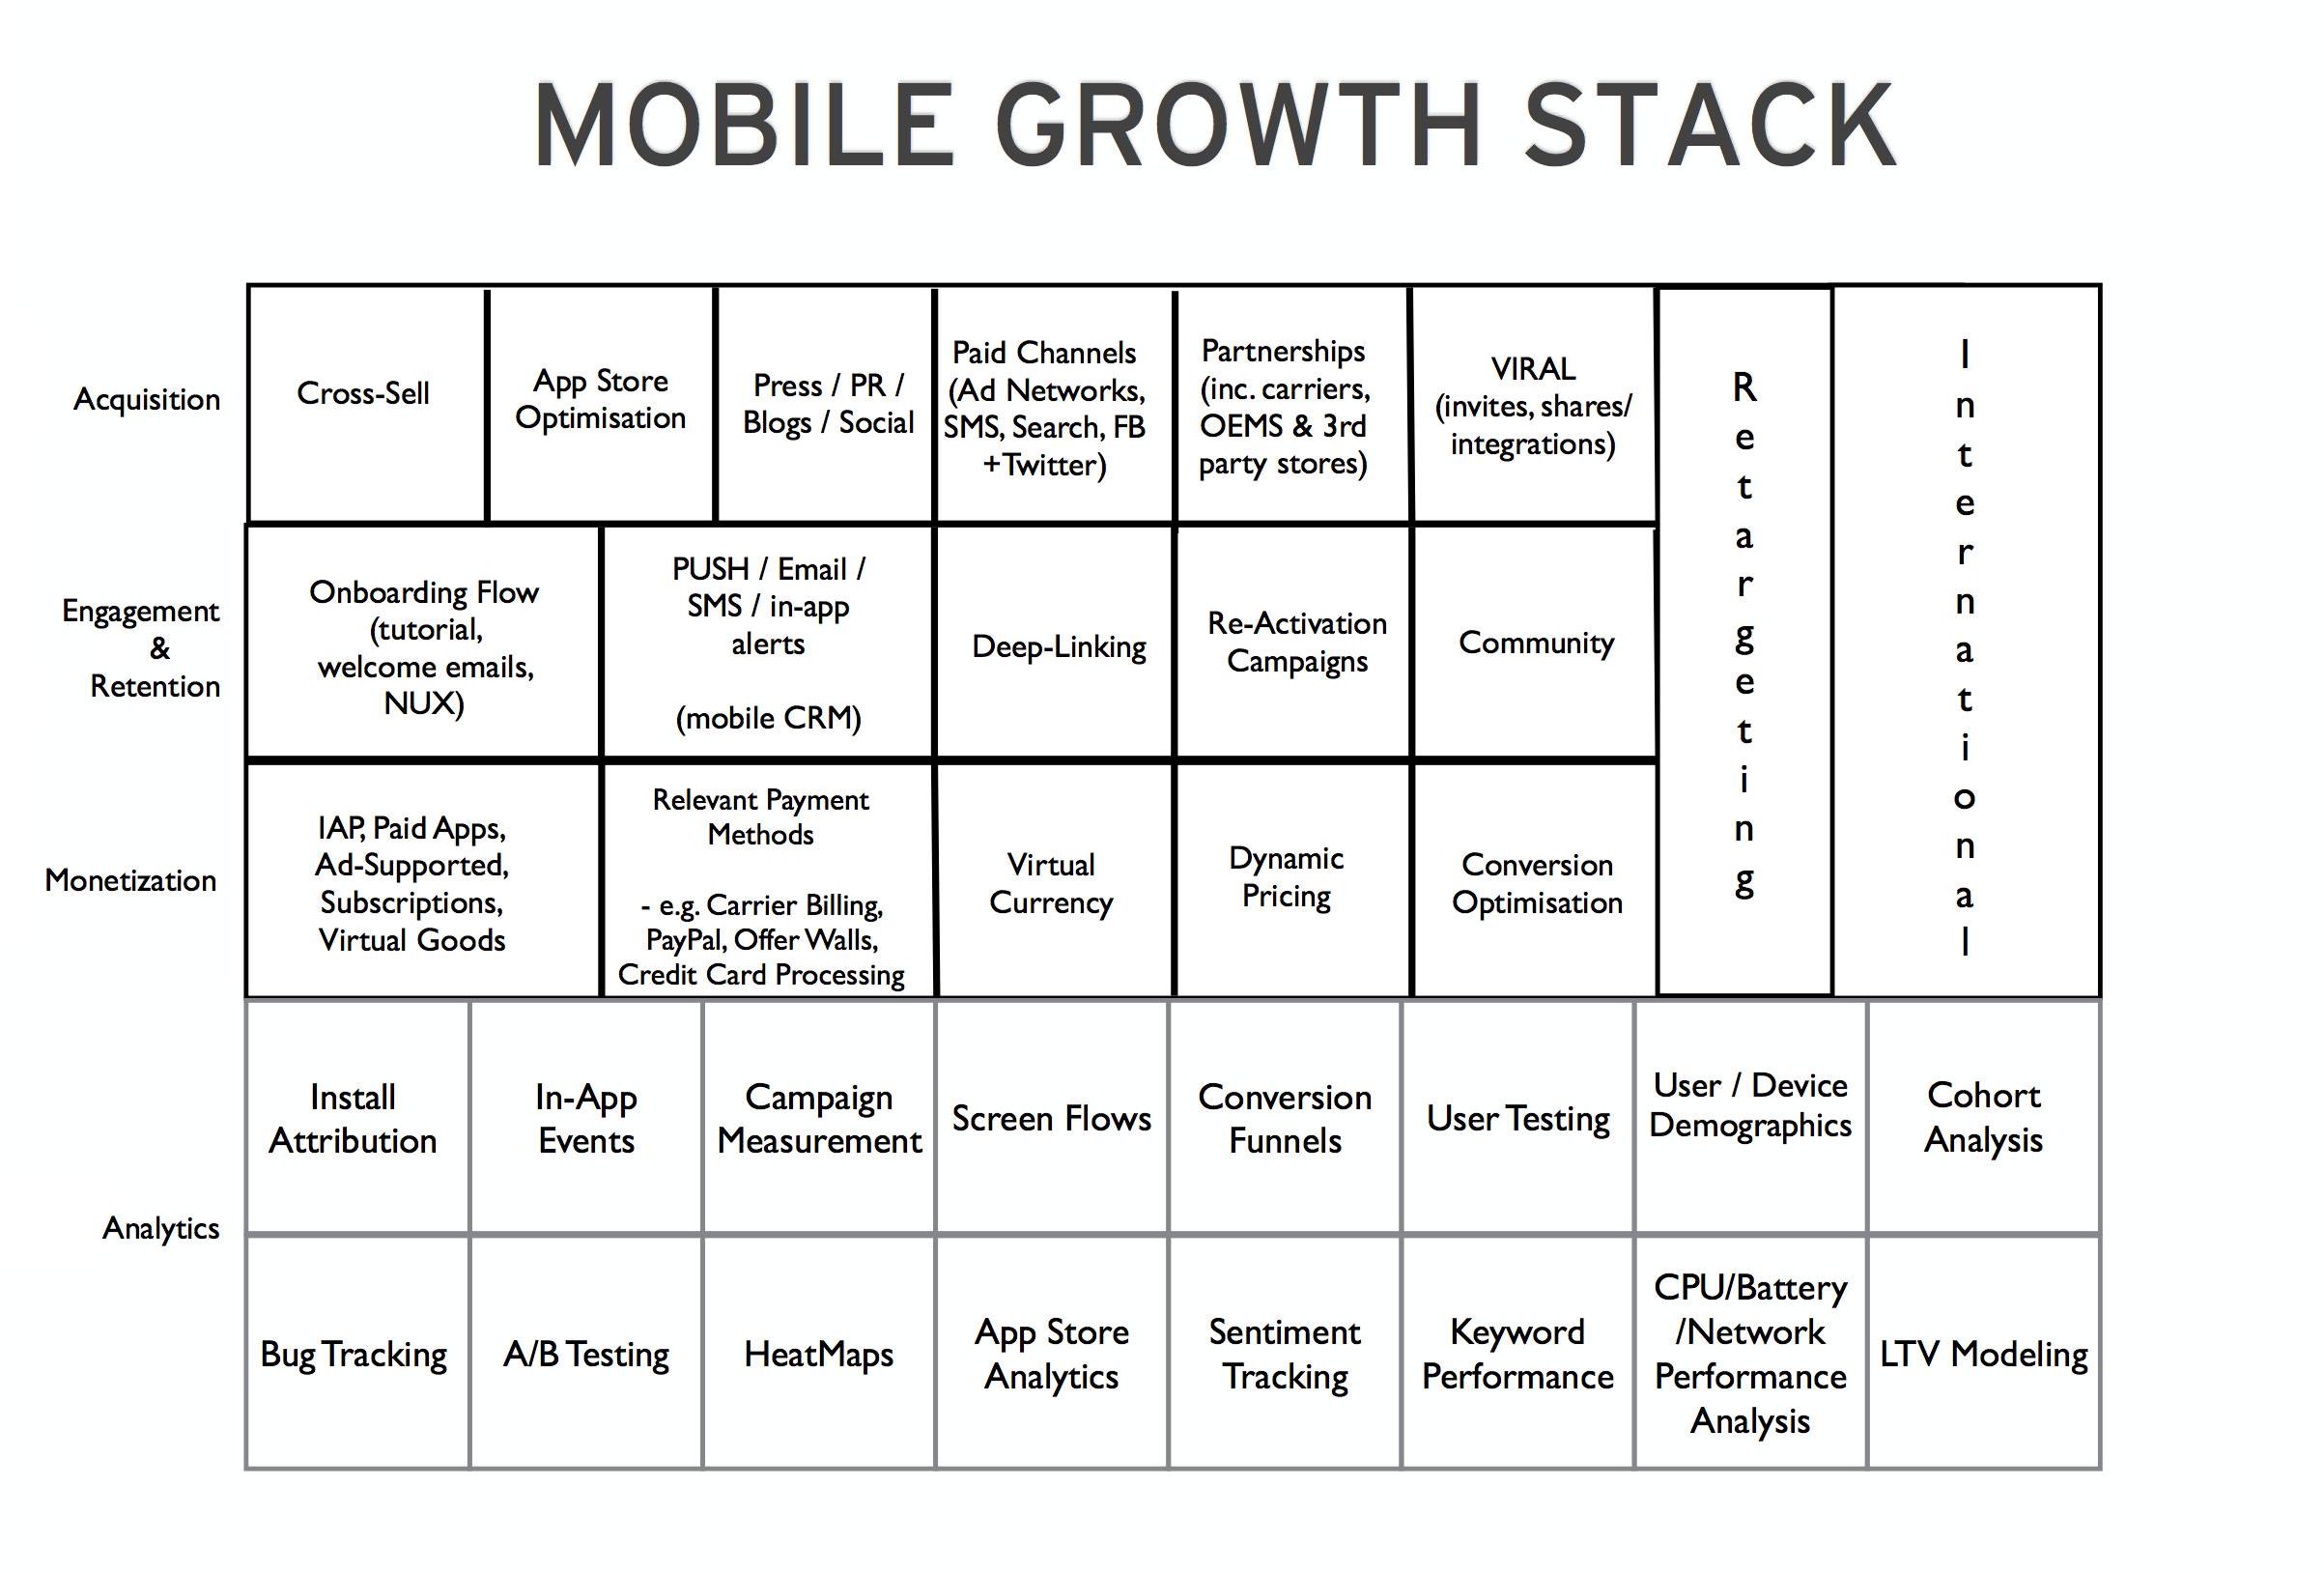 The-Mobile-Growth-Stack-by-Andy-Carvell-graphic-chart